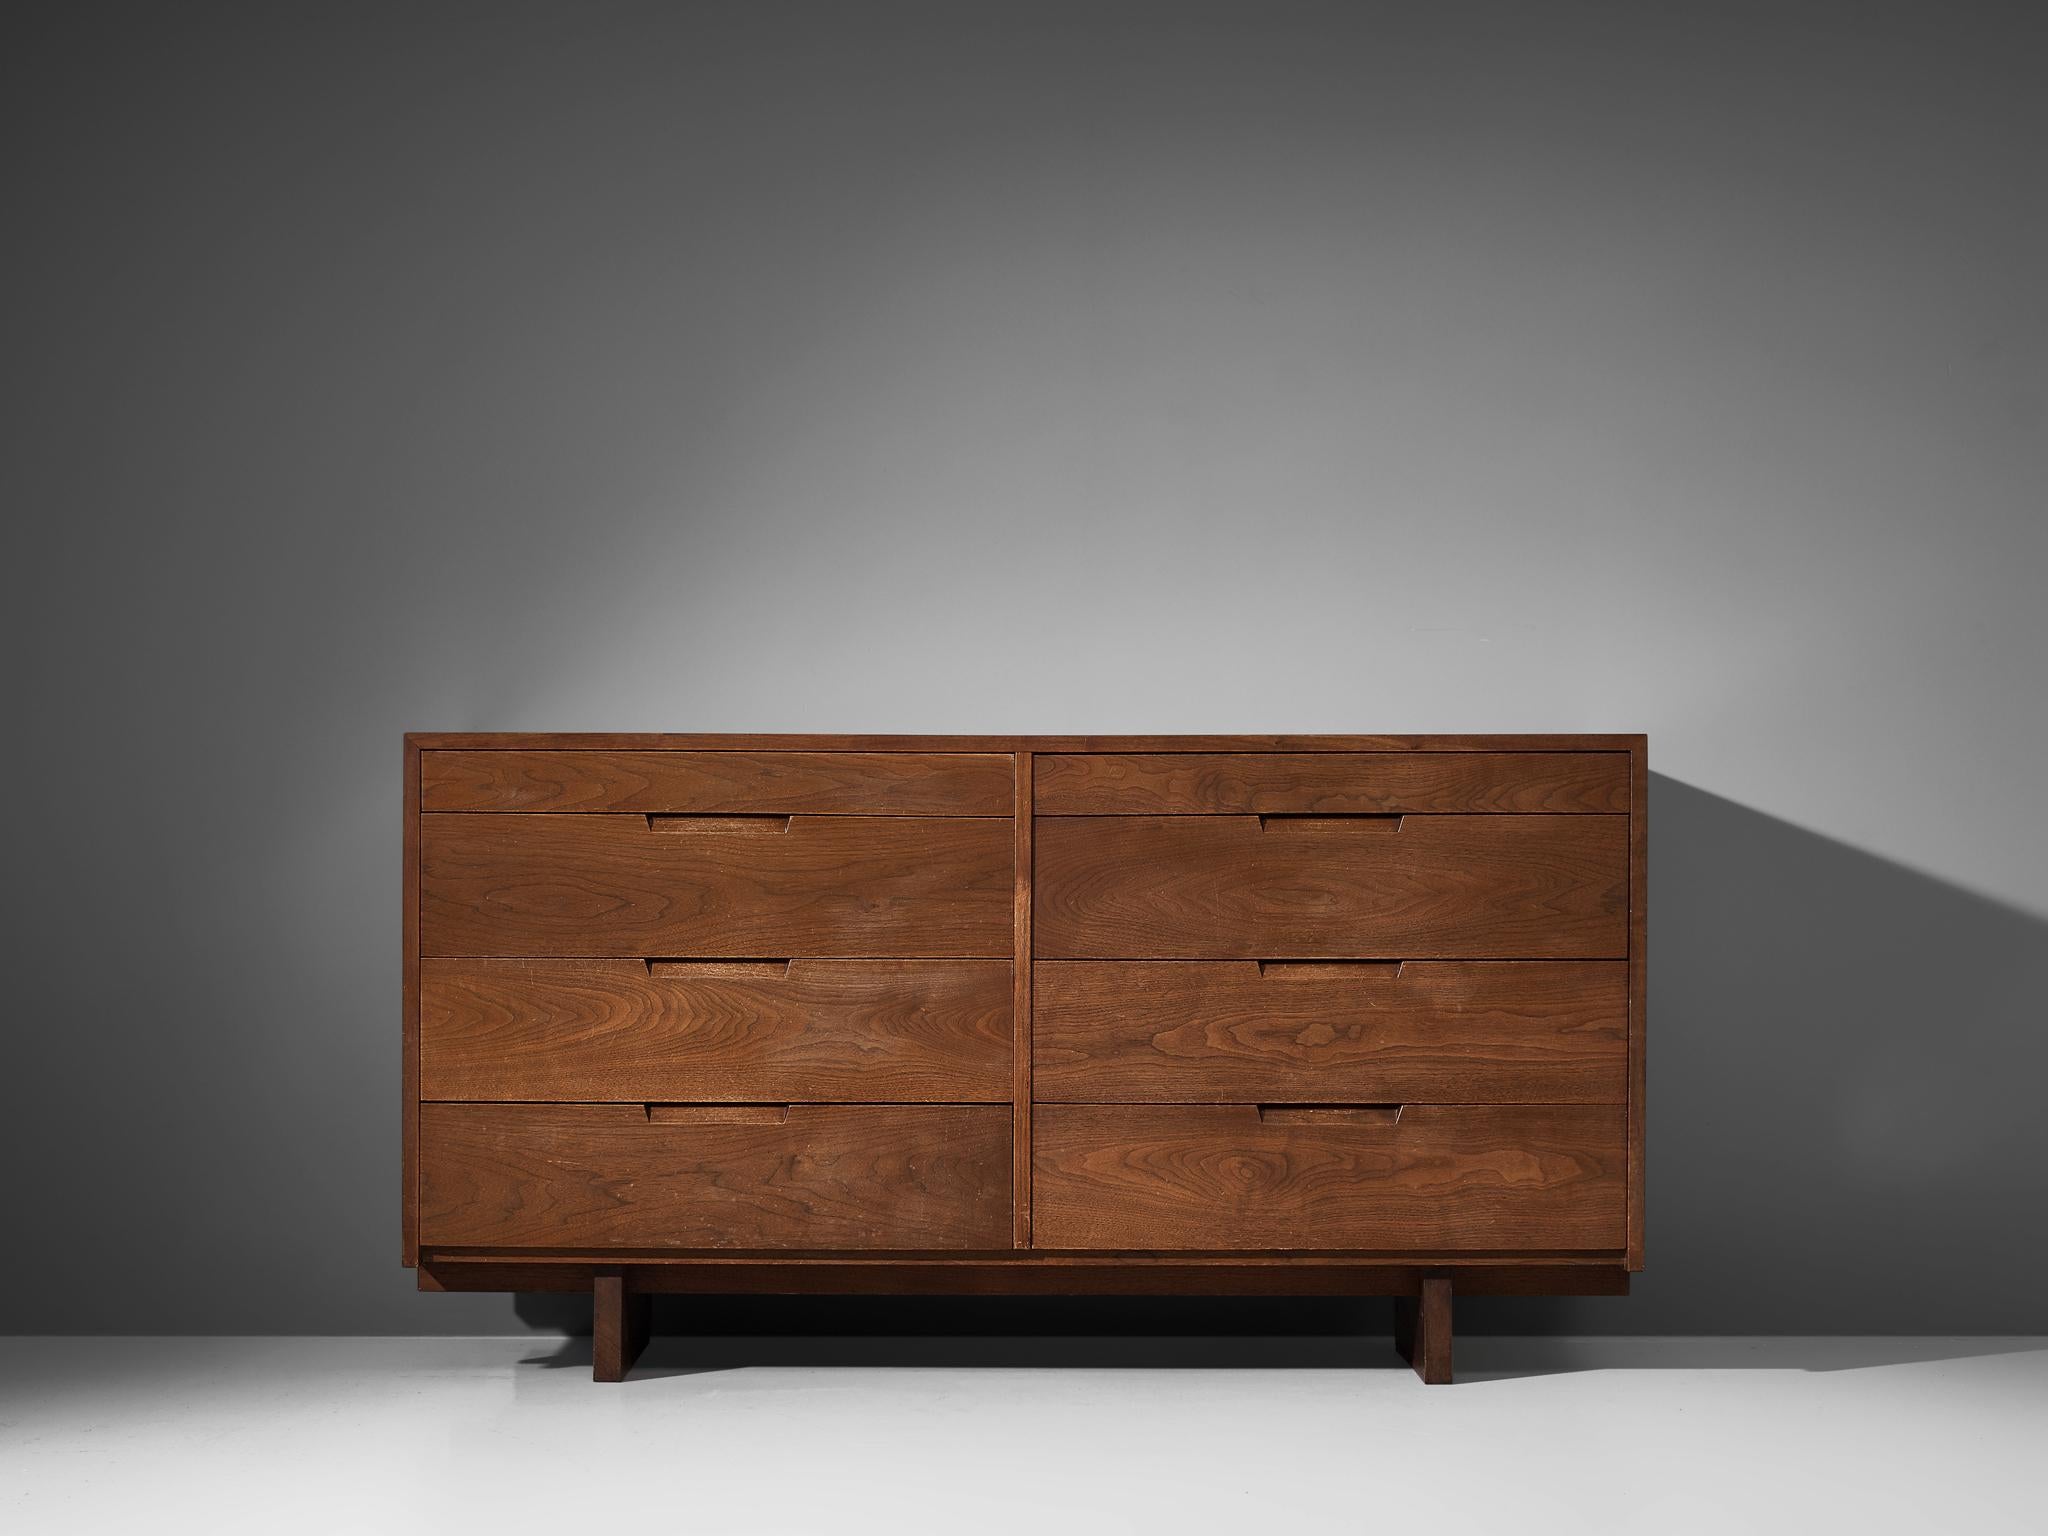 American George Nakashima a 'Born Together' pair of Chests of Drawers in Walnut,  1955